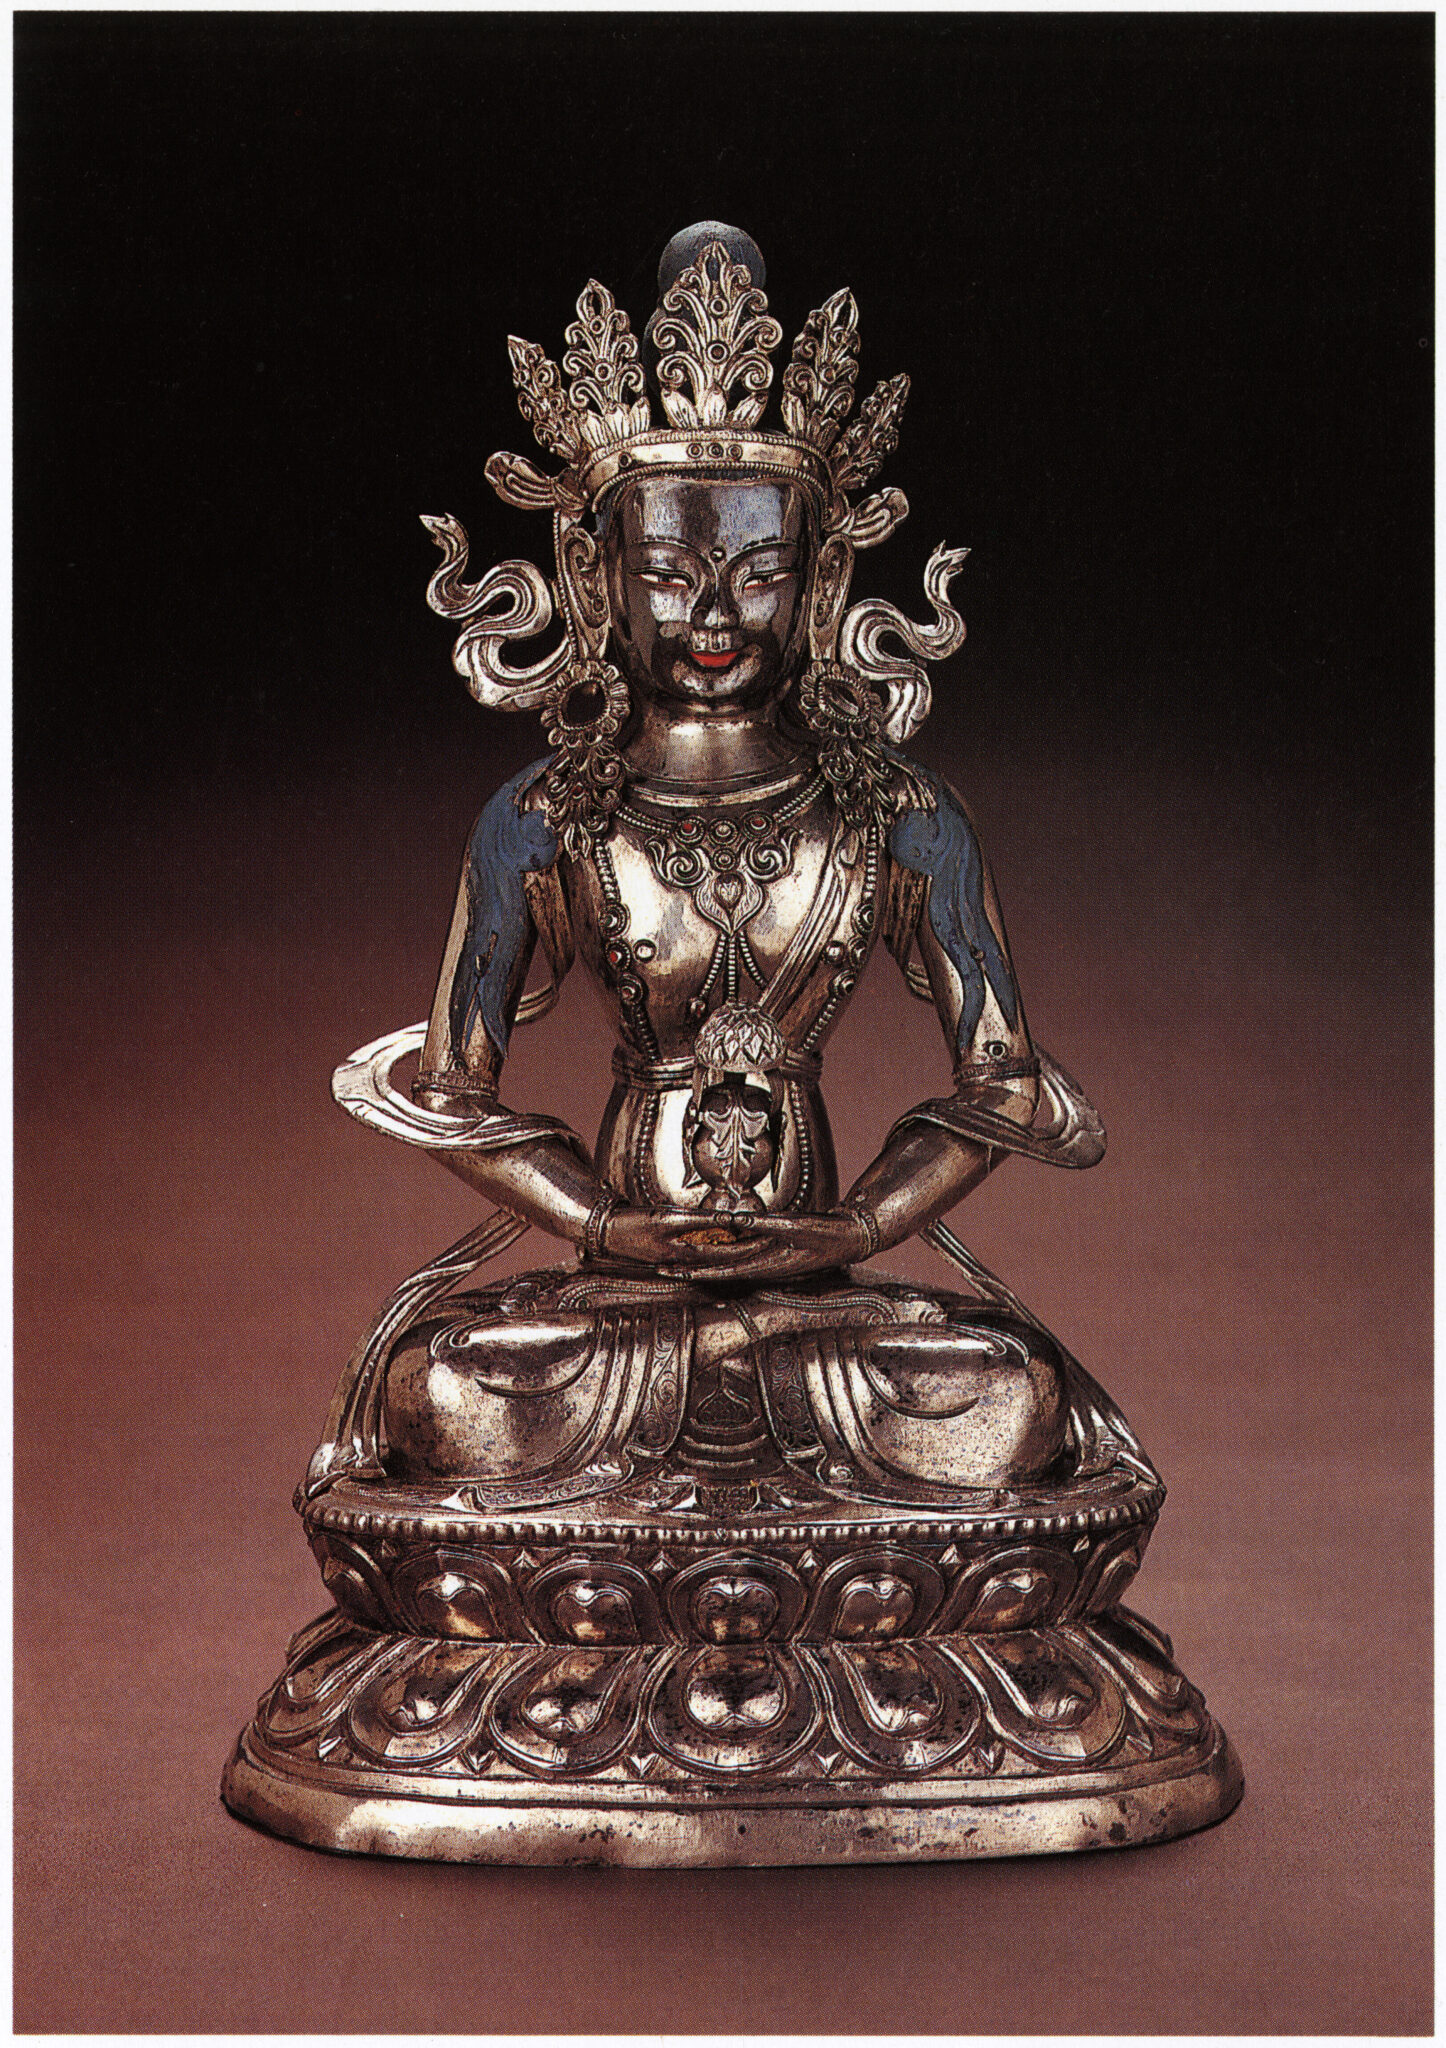 Silver statue depicting seated, crowned Buddha holding small vase in hands positioned in lap